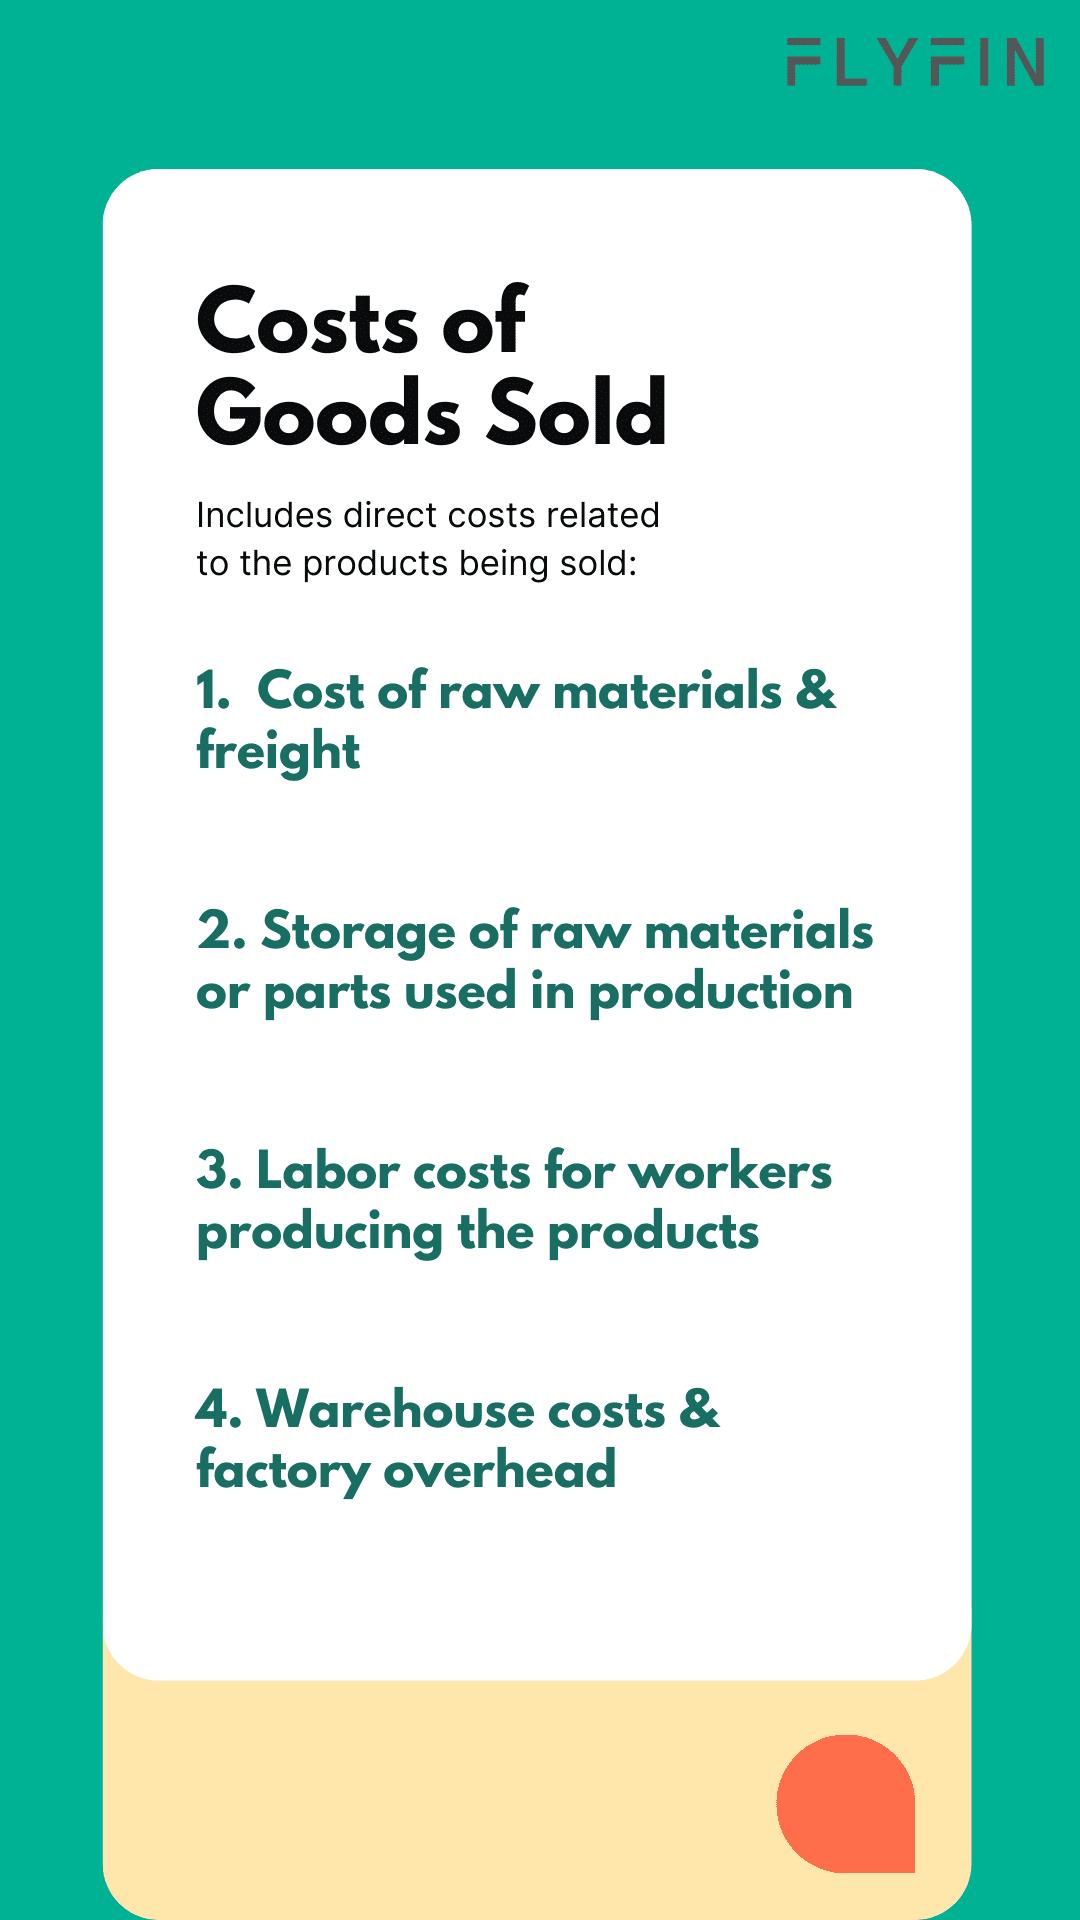 Cost of goods sold: Schedule 1120-A